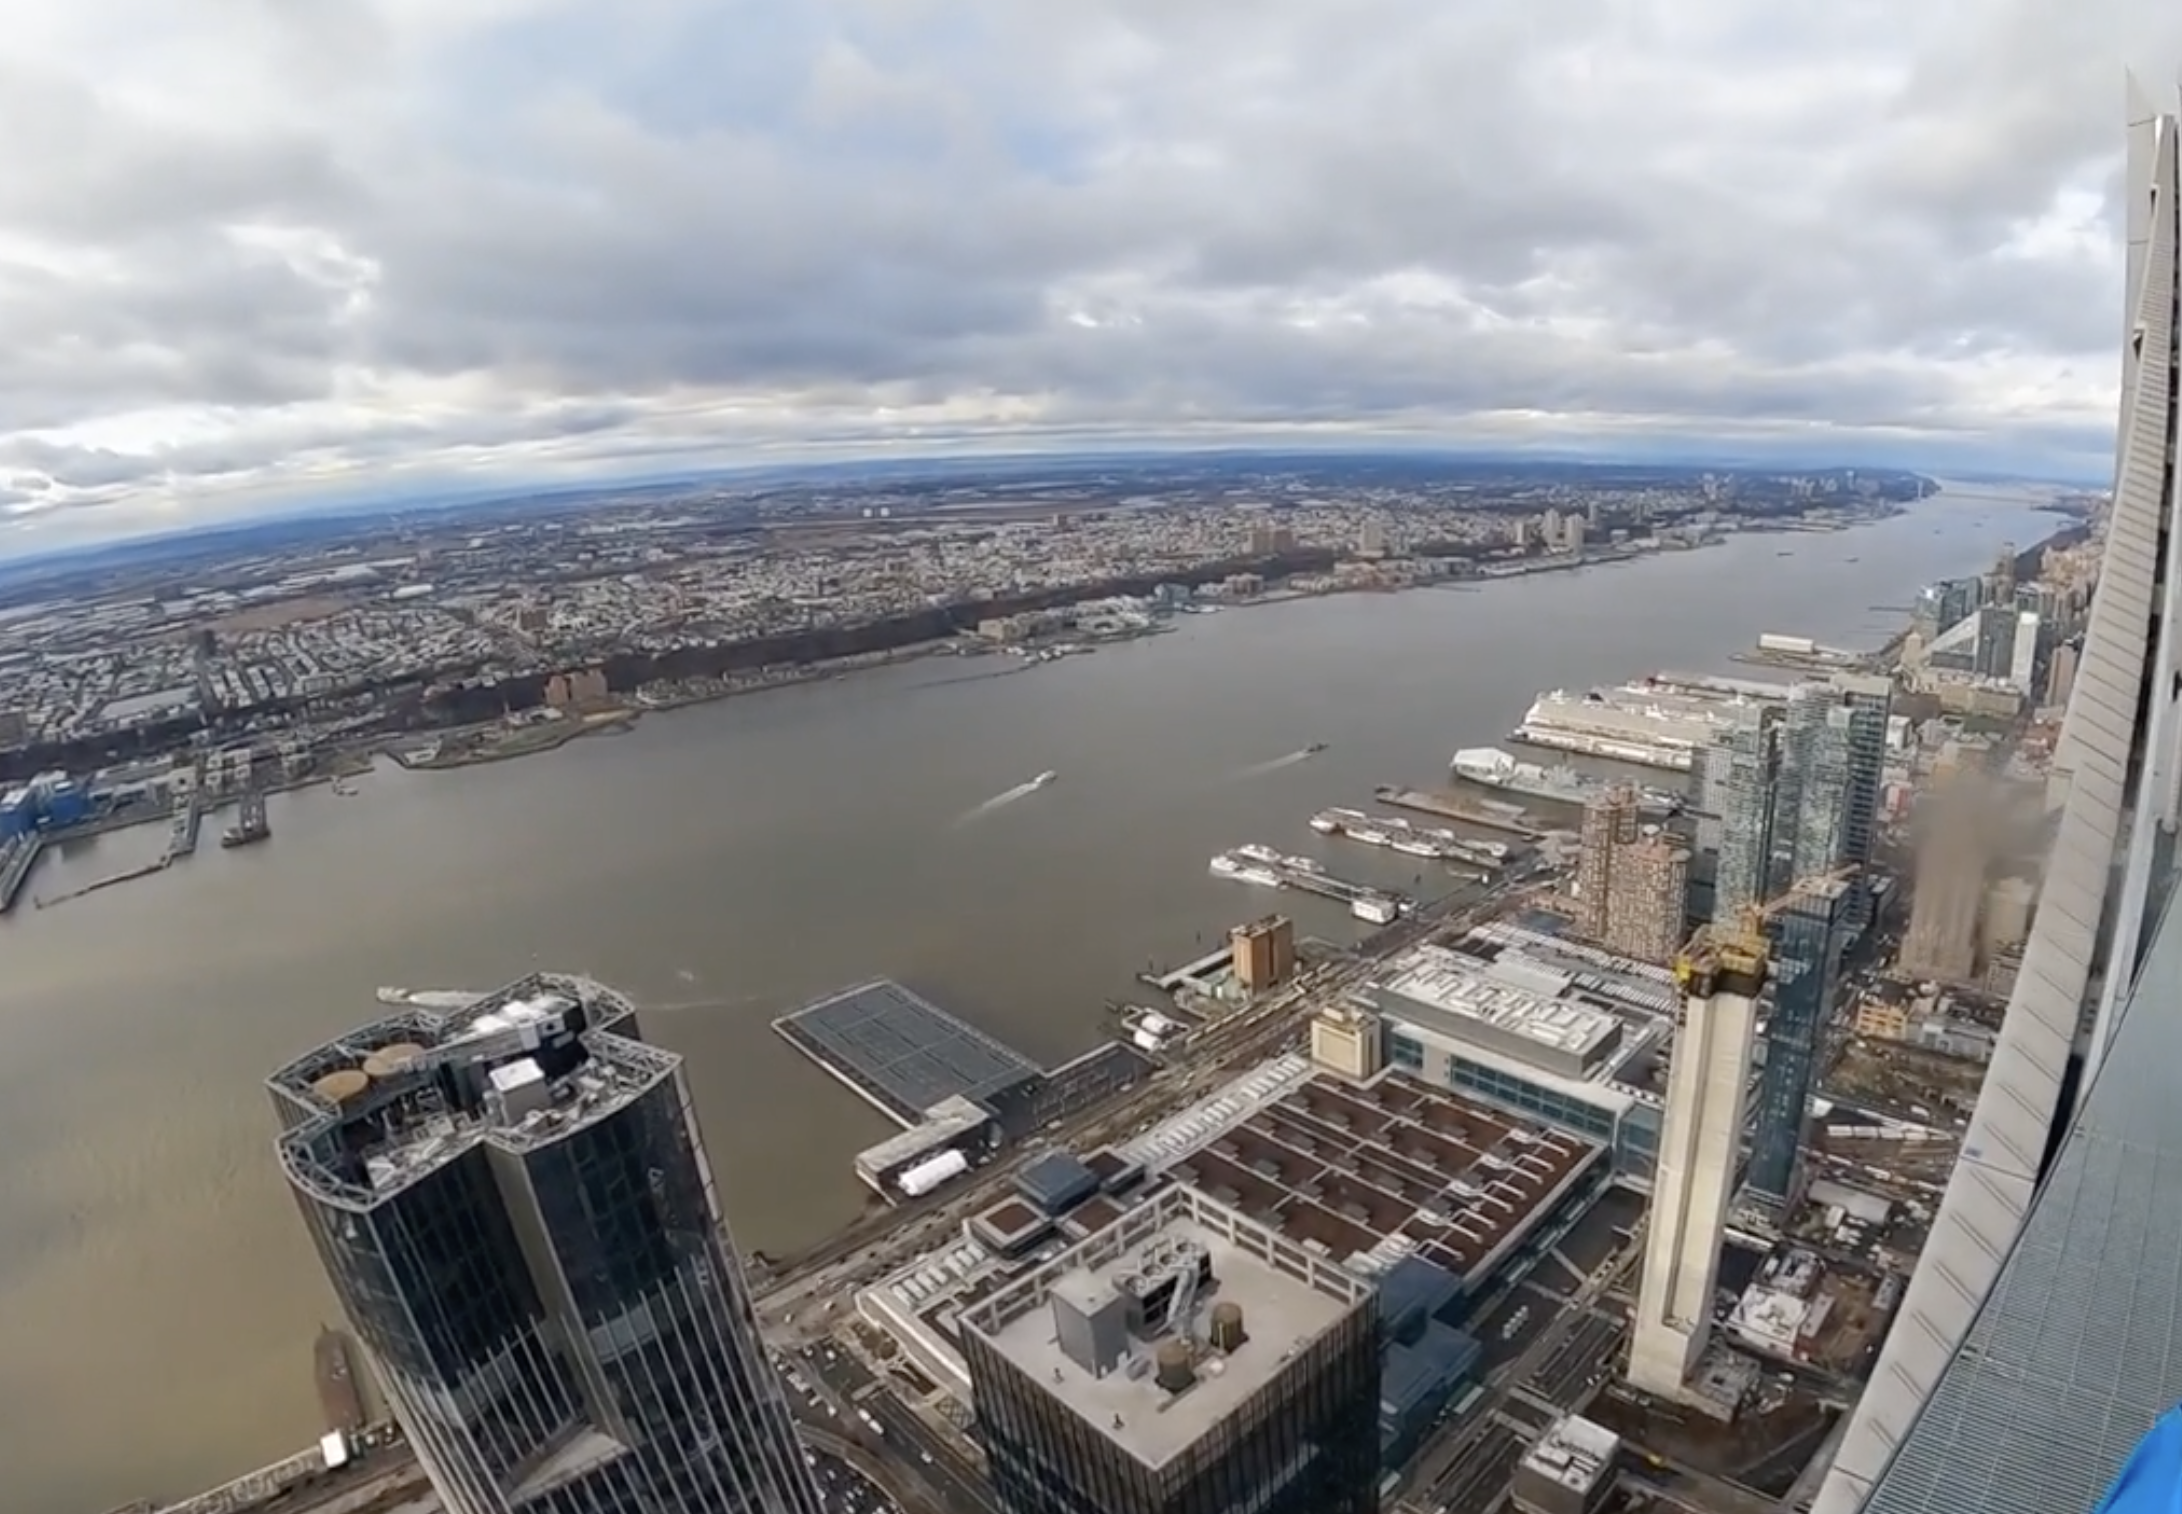 A wide view of the Hudson River and New Jersey